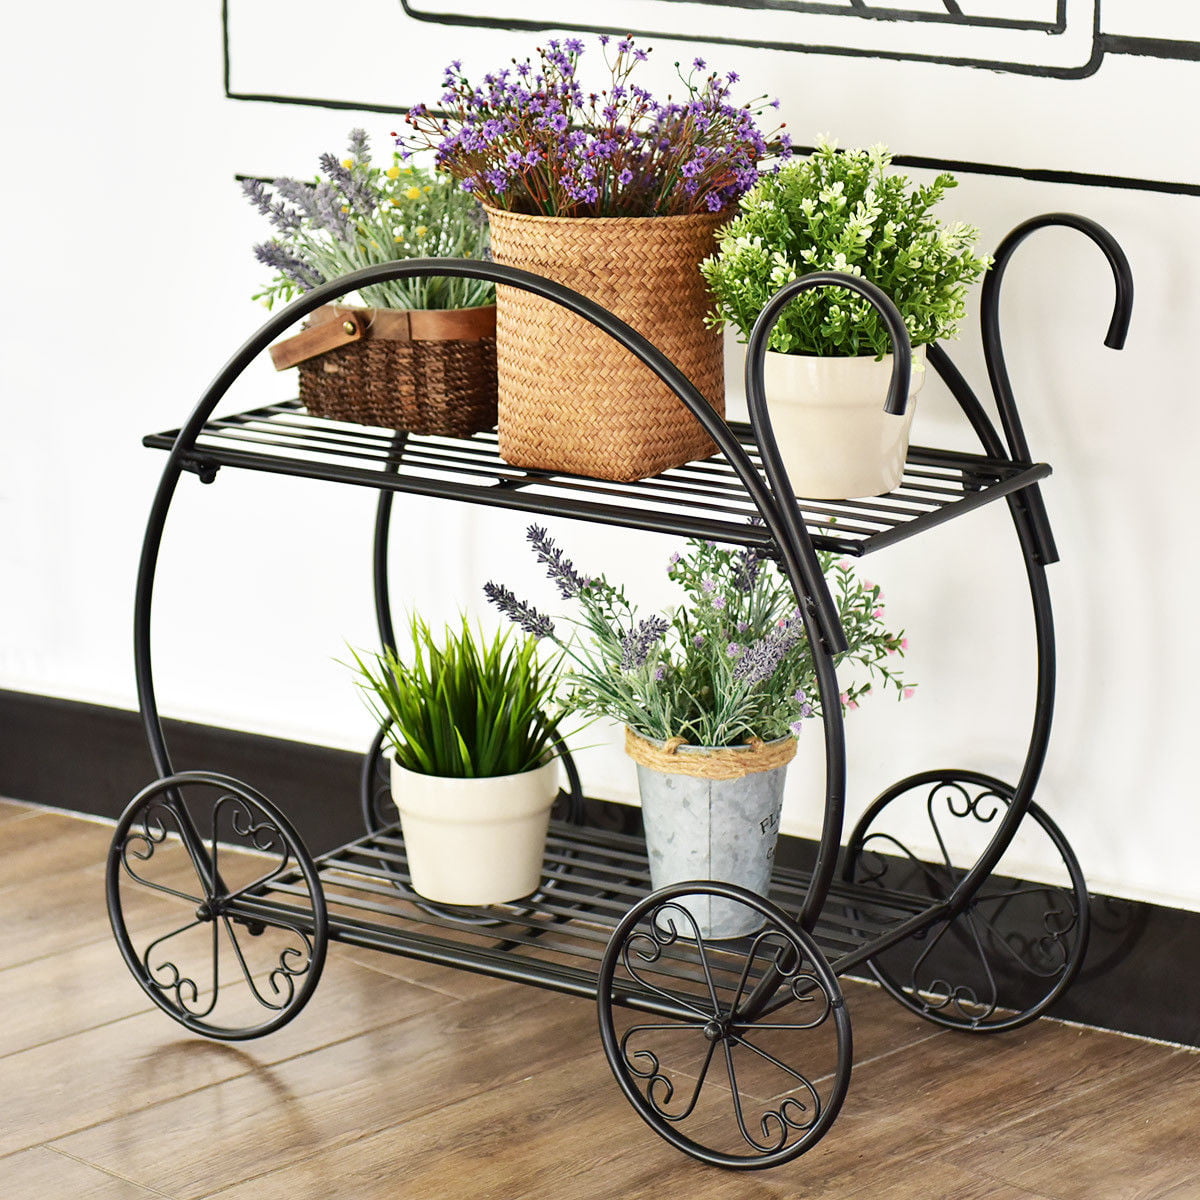 Patio Planter 2 Tiered Garden Cart Metal Plant Stand Home Decor Sfhs Org